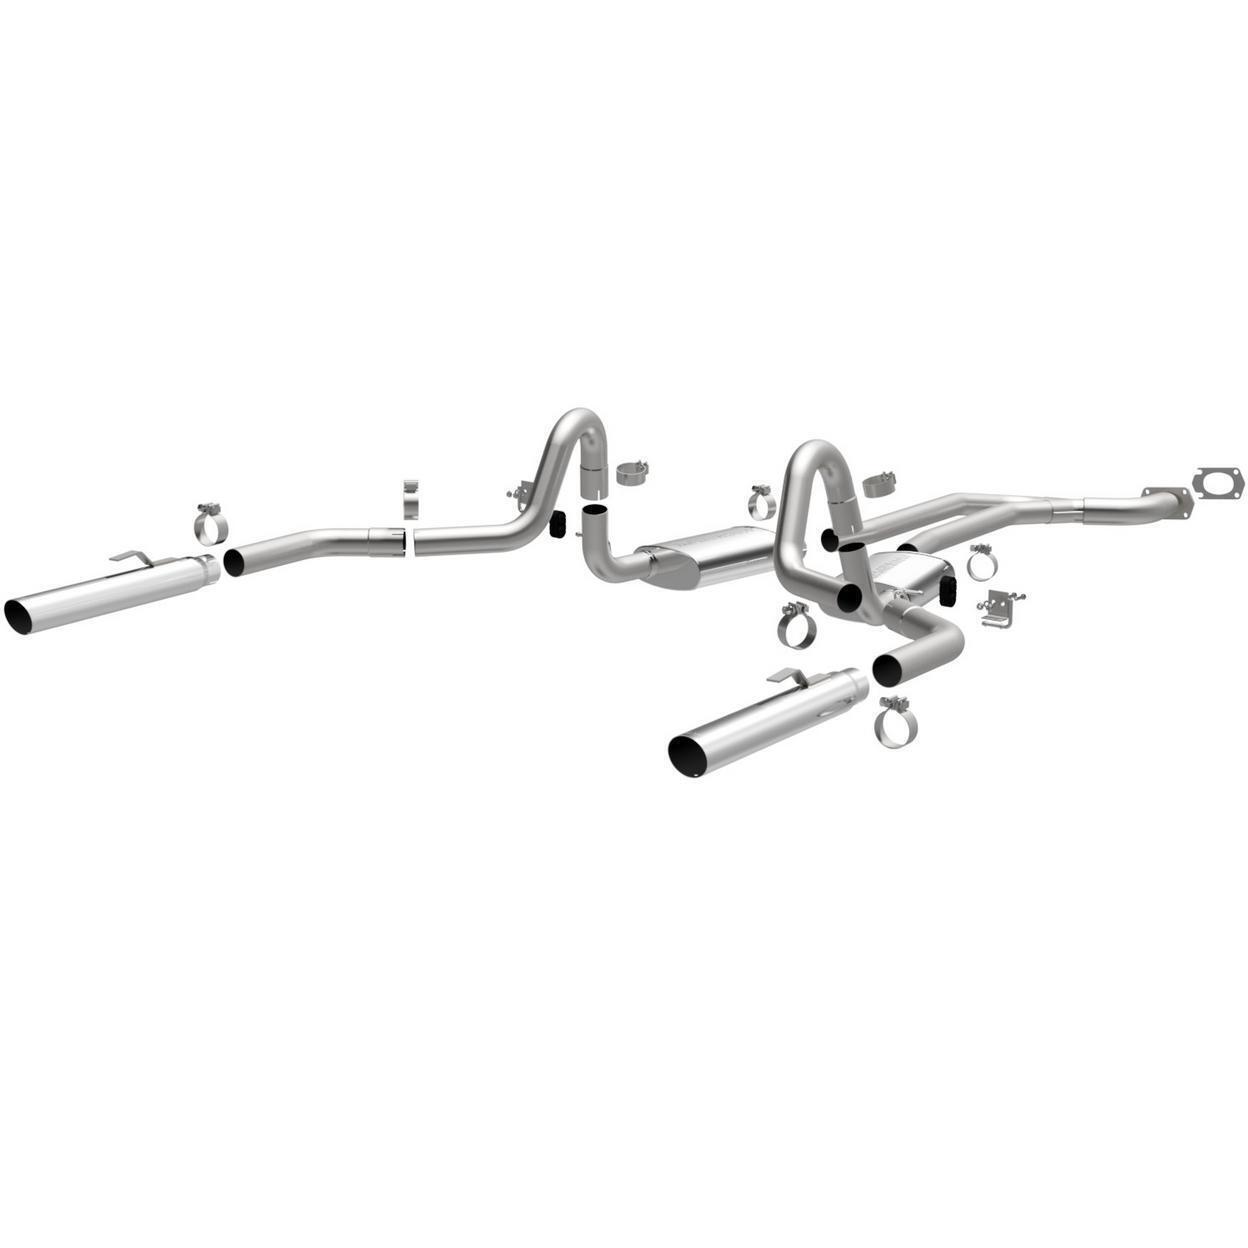 Exhaust System Kit for 1984-1987 Chevrolet Monte Carlo